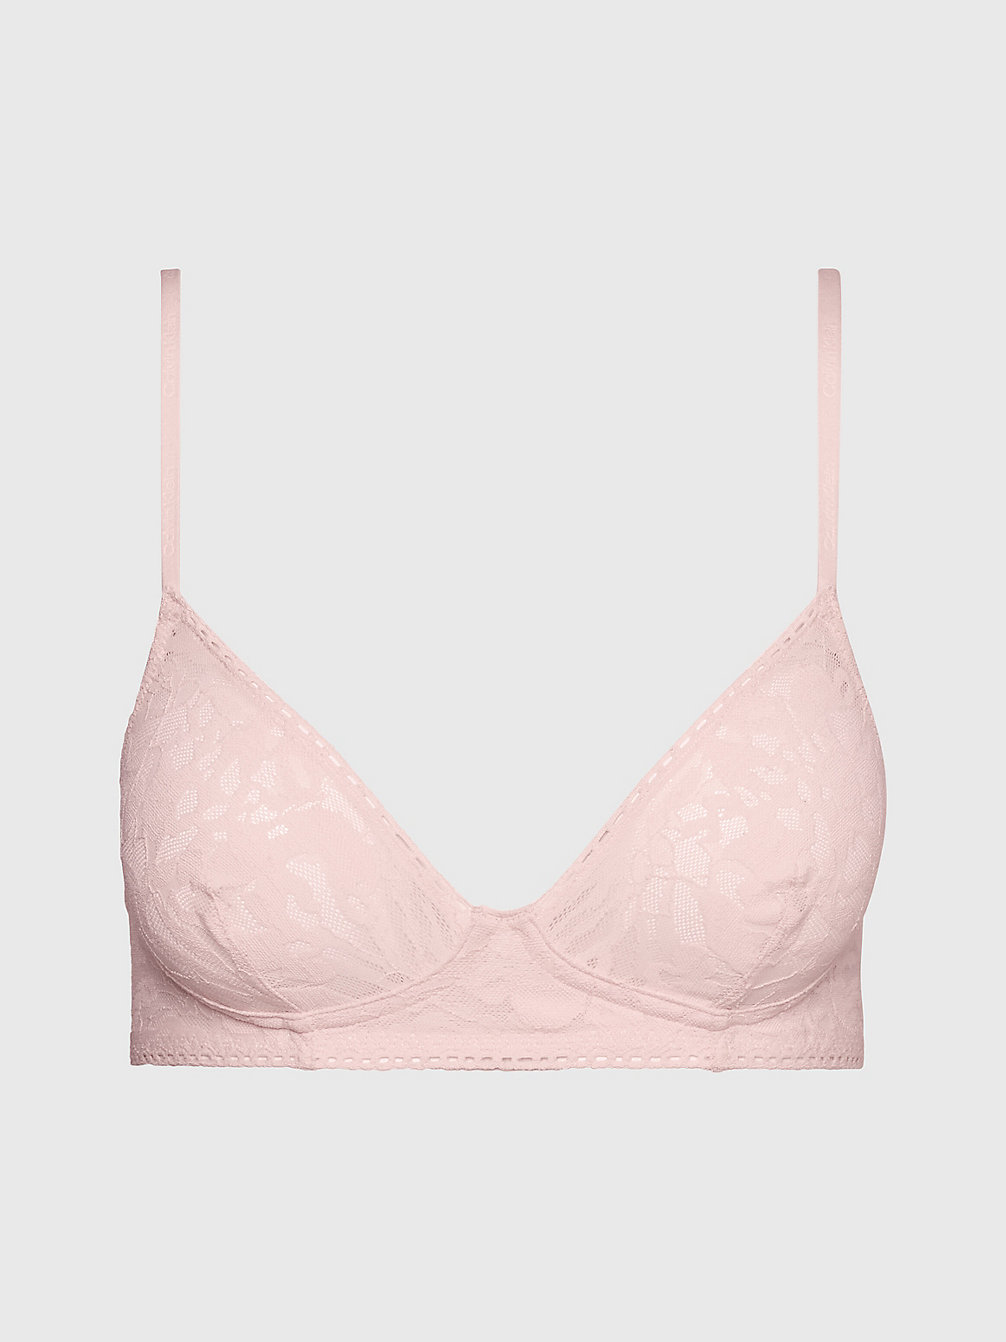 Corpiño - Ultra Soft Lace > PINK > undefined mujeres > Calvin Klein